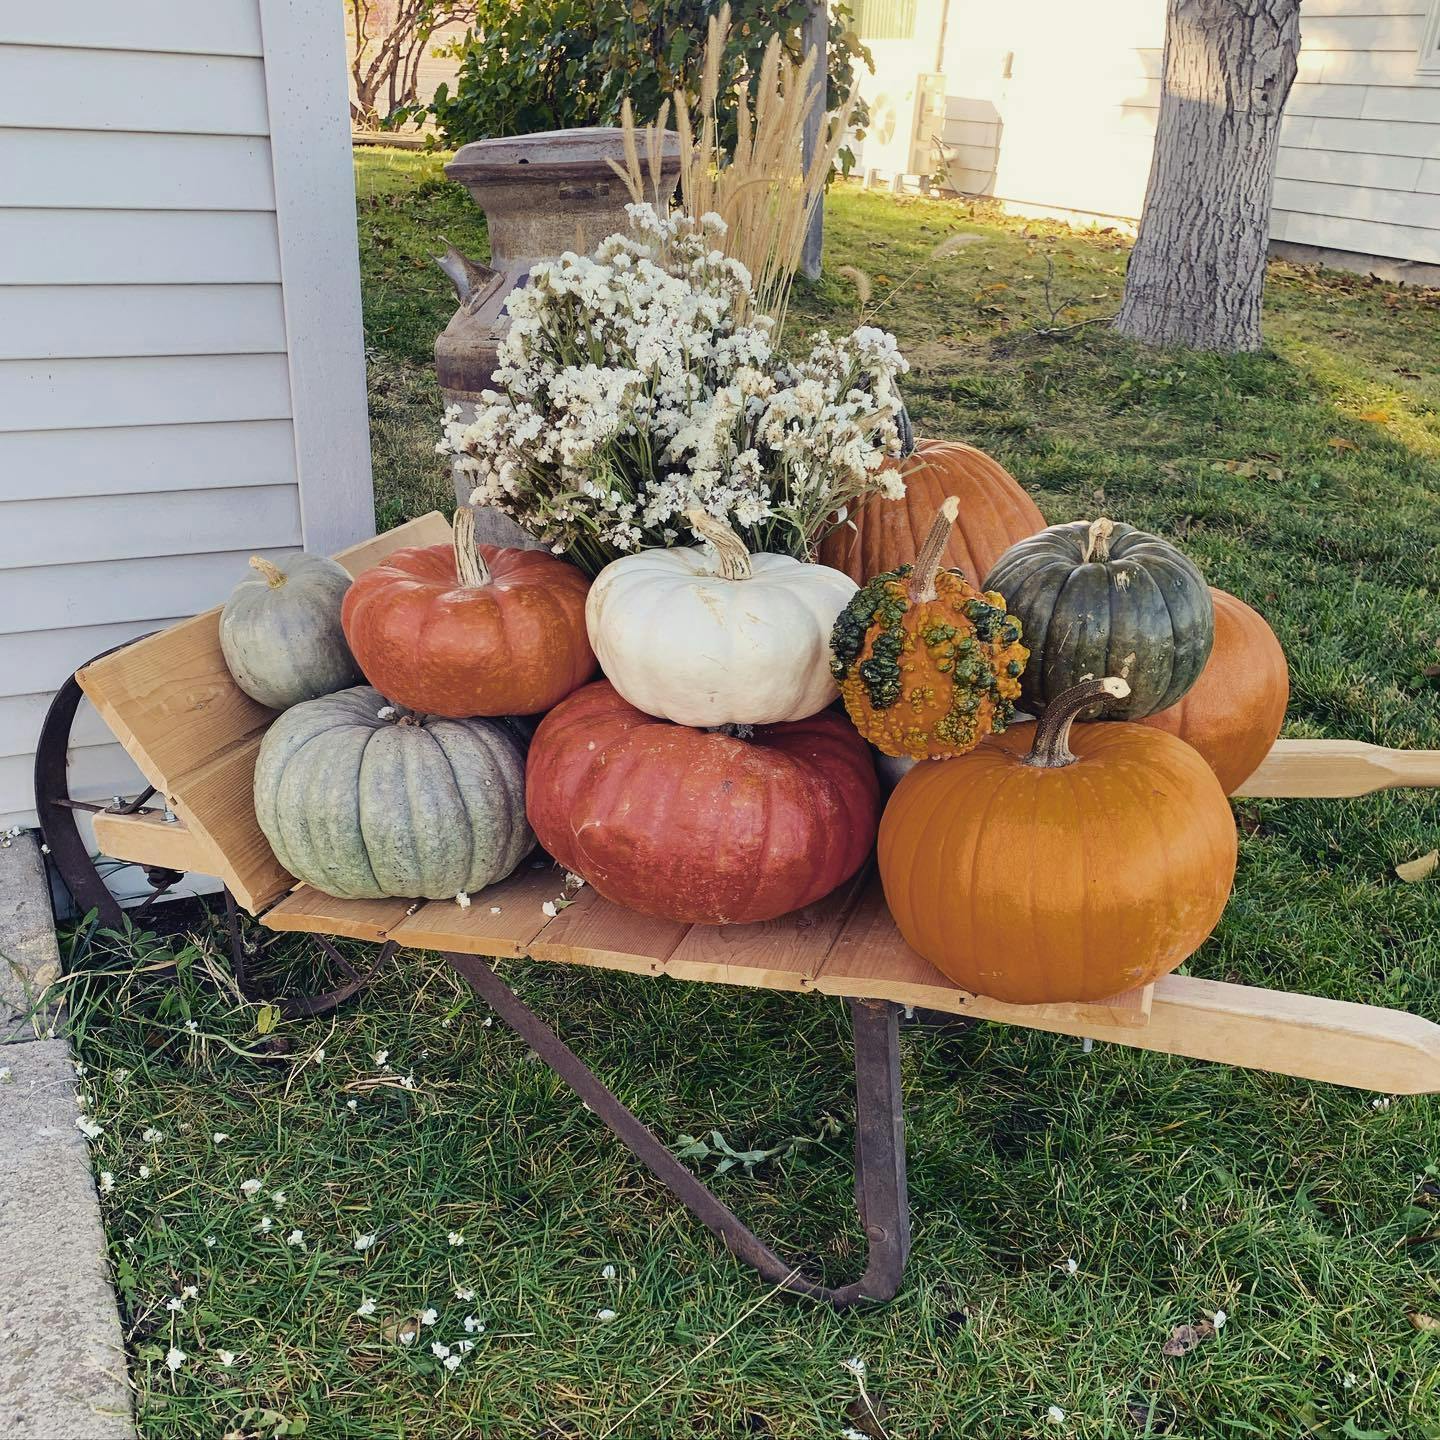 I have a confession. I have a pumpkin obsession.  I plan on growing myself all the pumpkins I want in the future!! I’ve been known to be stingy with my pumpkins😂
 This wheelbarrow cart was restored by @mccollough.don 
  It was used on the McCollough Dairy here in Nampa back in the day, as was the milk can.  Dad has shared how growing up they used to put the full milk cans out by the road to be picked up. Being connected to farm history is important.  What stories these farm tools could tell!

#mccolloughfarms #farmidaho #farm #farmhistory #pumpkinpatch #pumpkin #fall #lowefamilyfarmstead